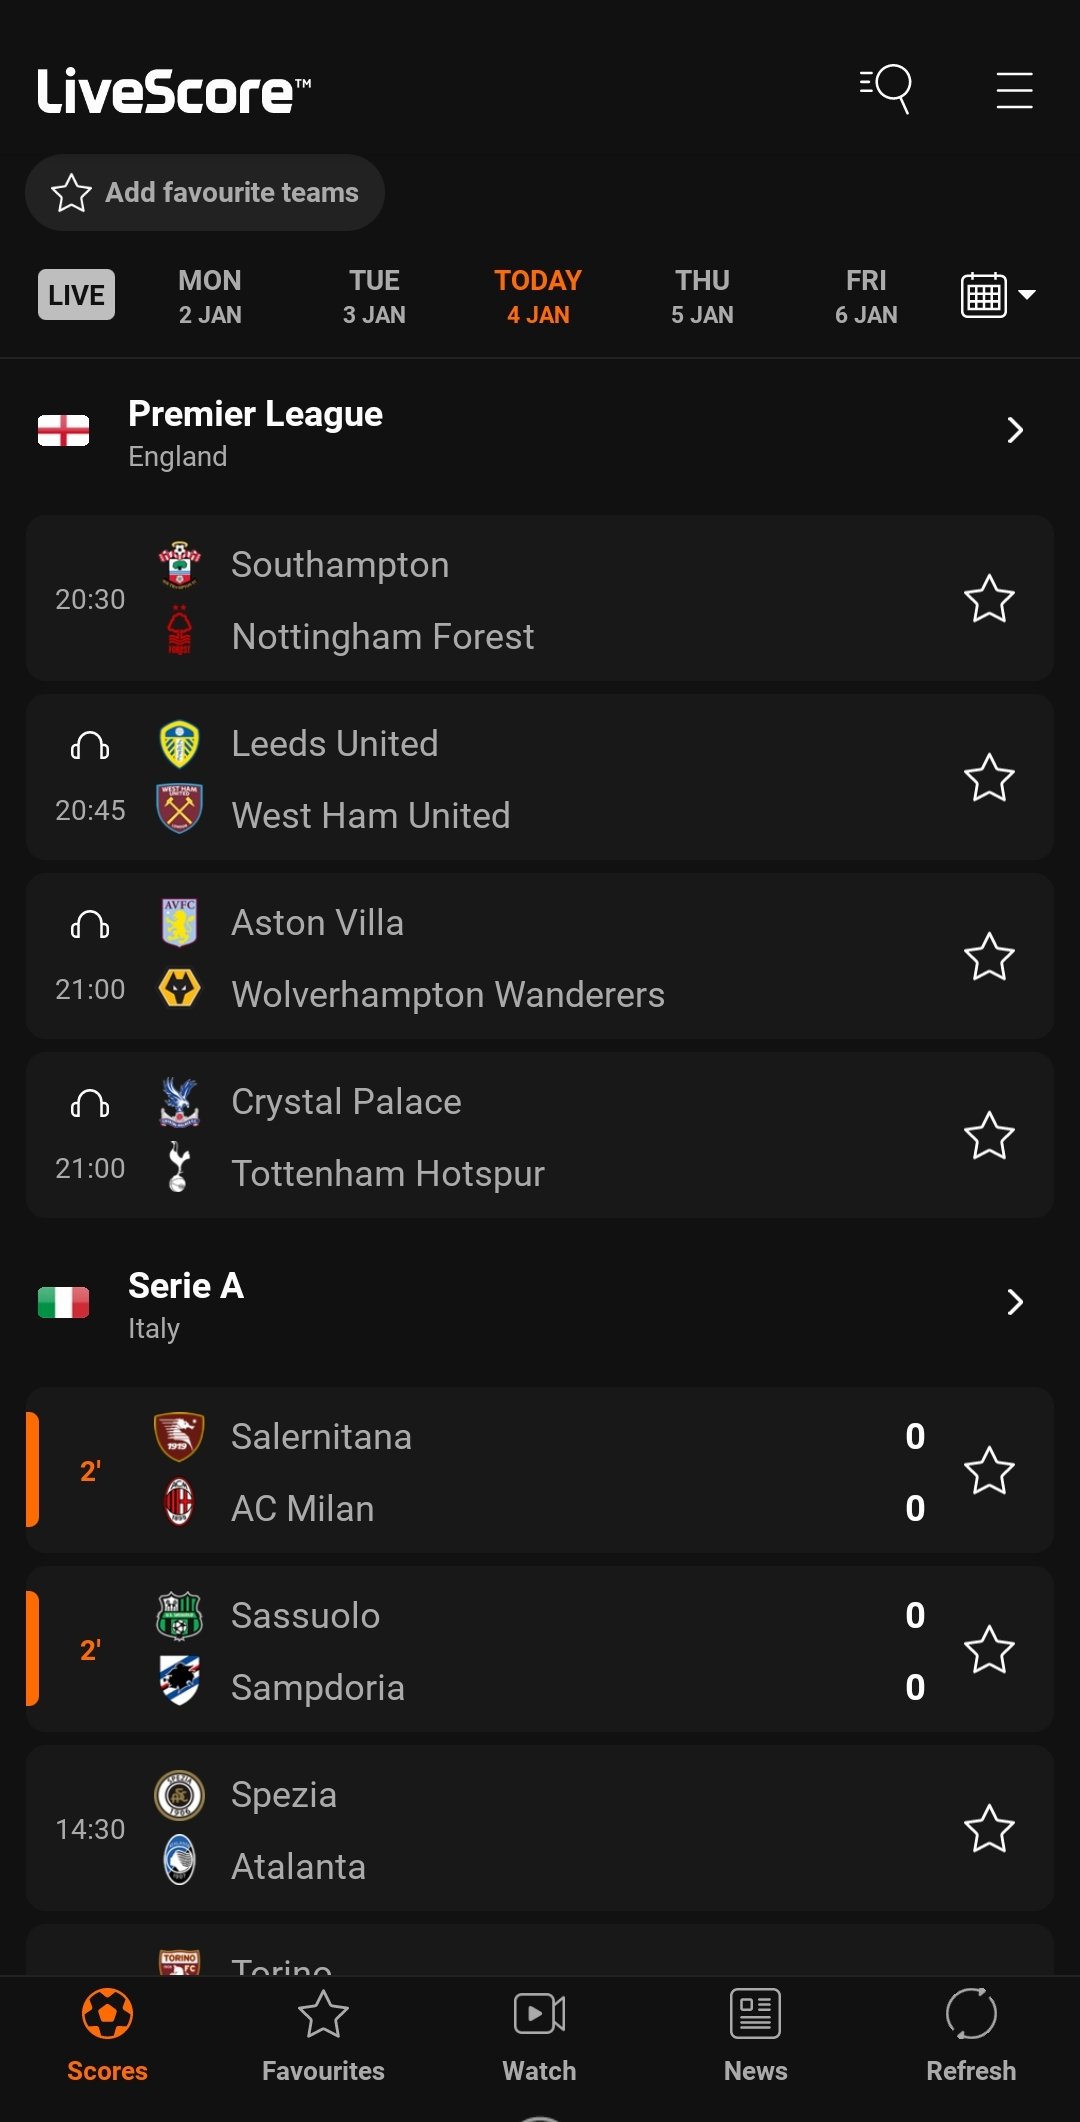 LiveScore 4.3.1 - Download for Android APK Free